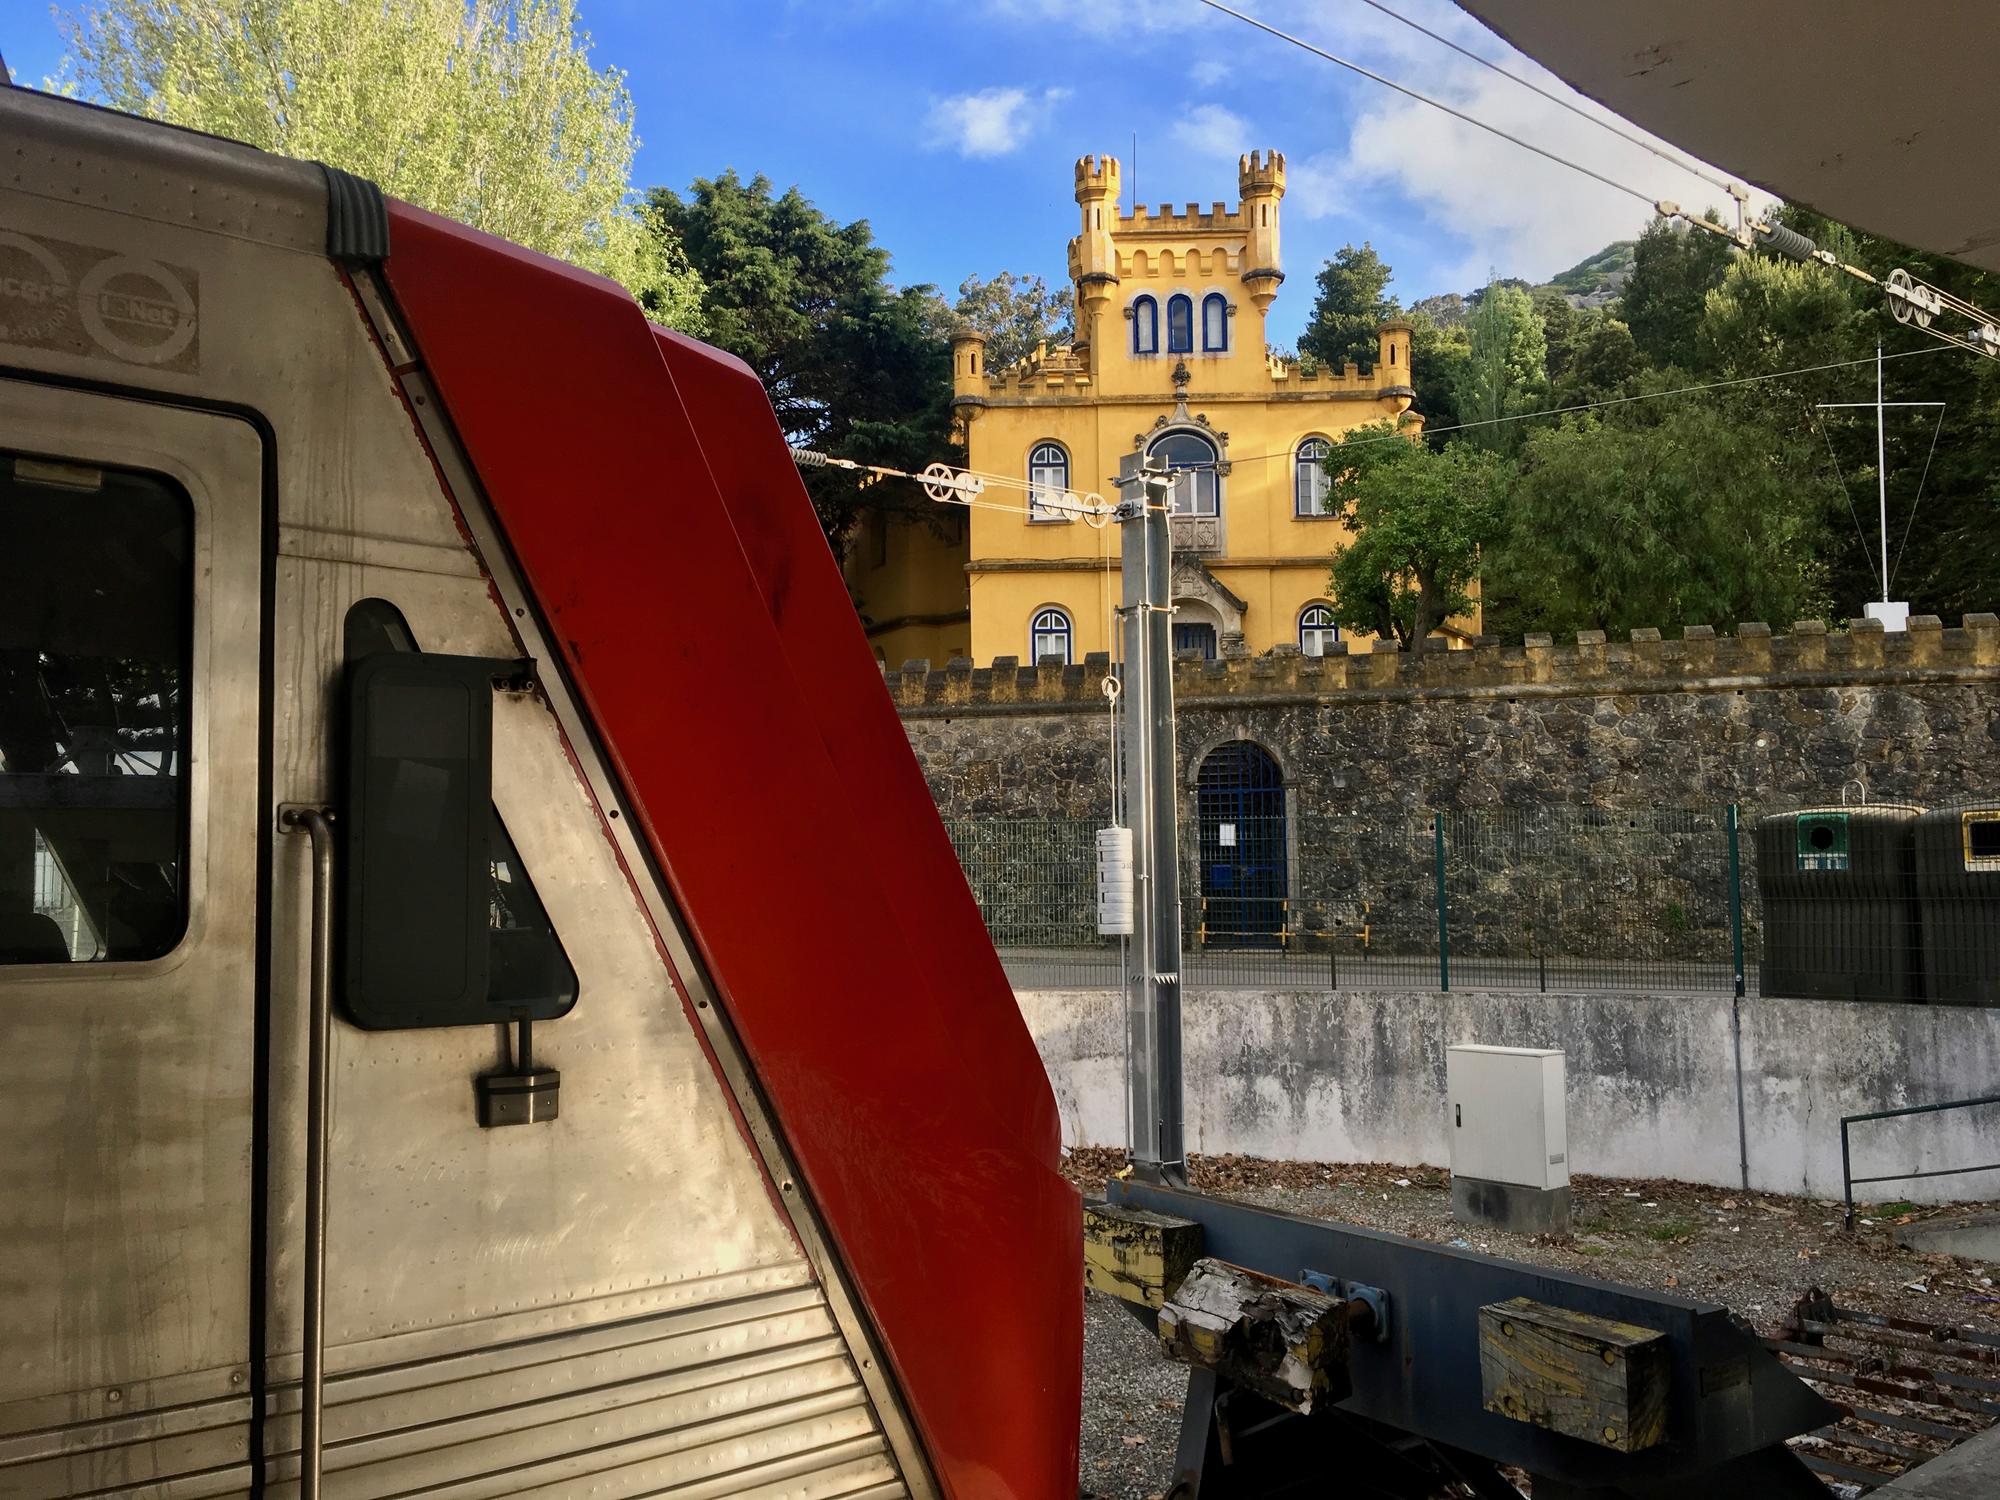 🇵🇹 Sintra, Portugal, May 2019.